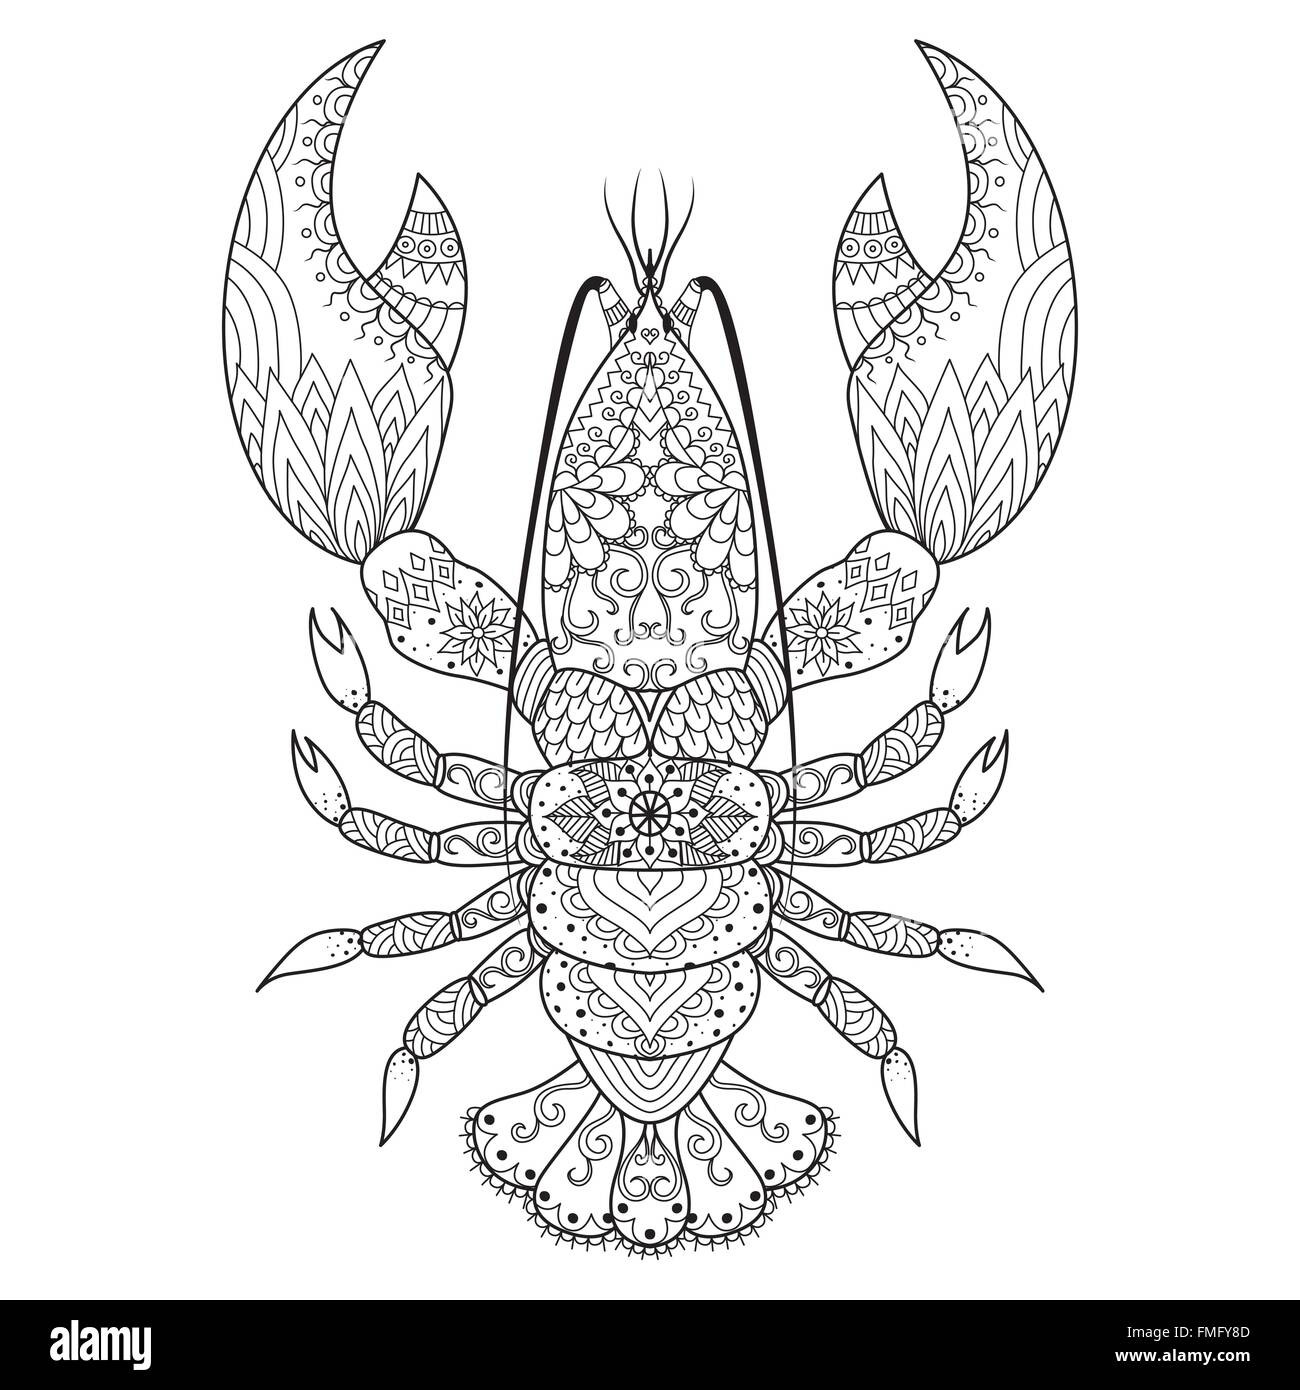 Lobster Tattoo Designs Transformation Protection Wealth And Harmony